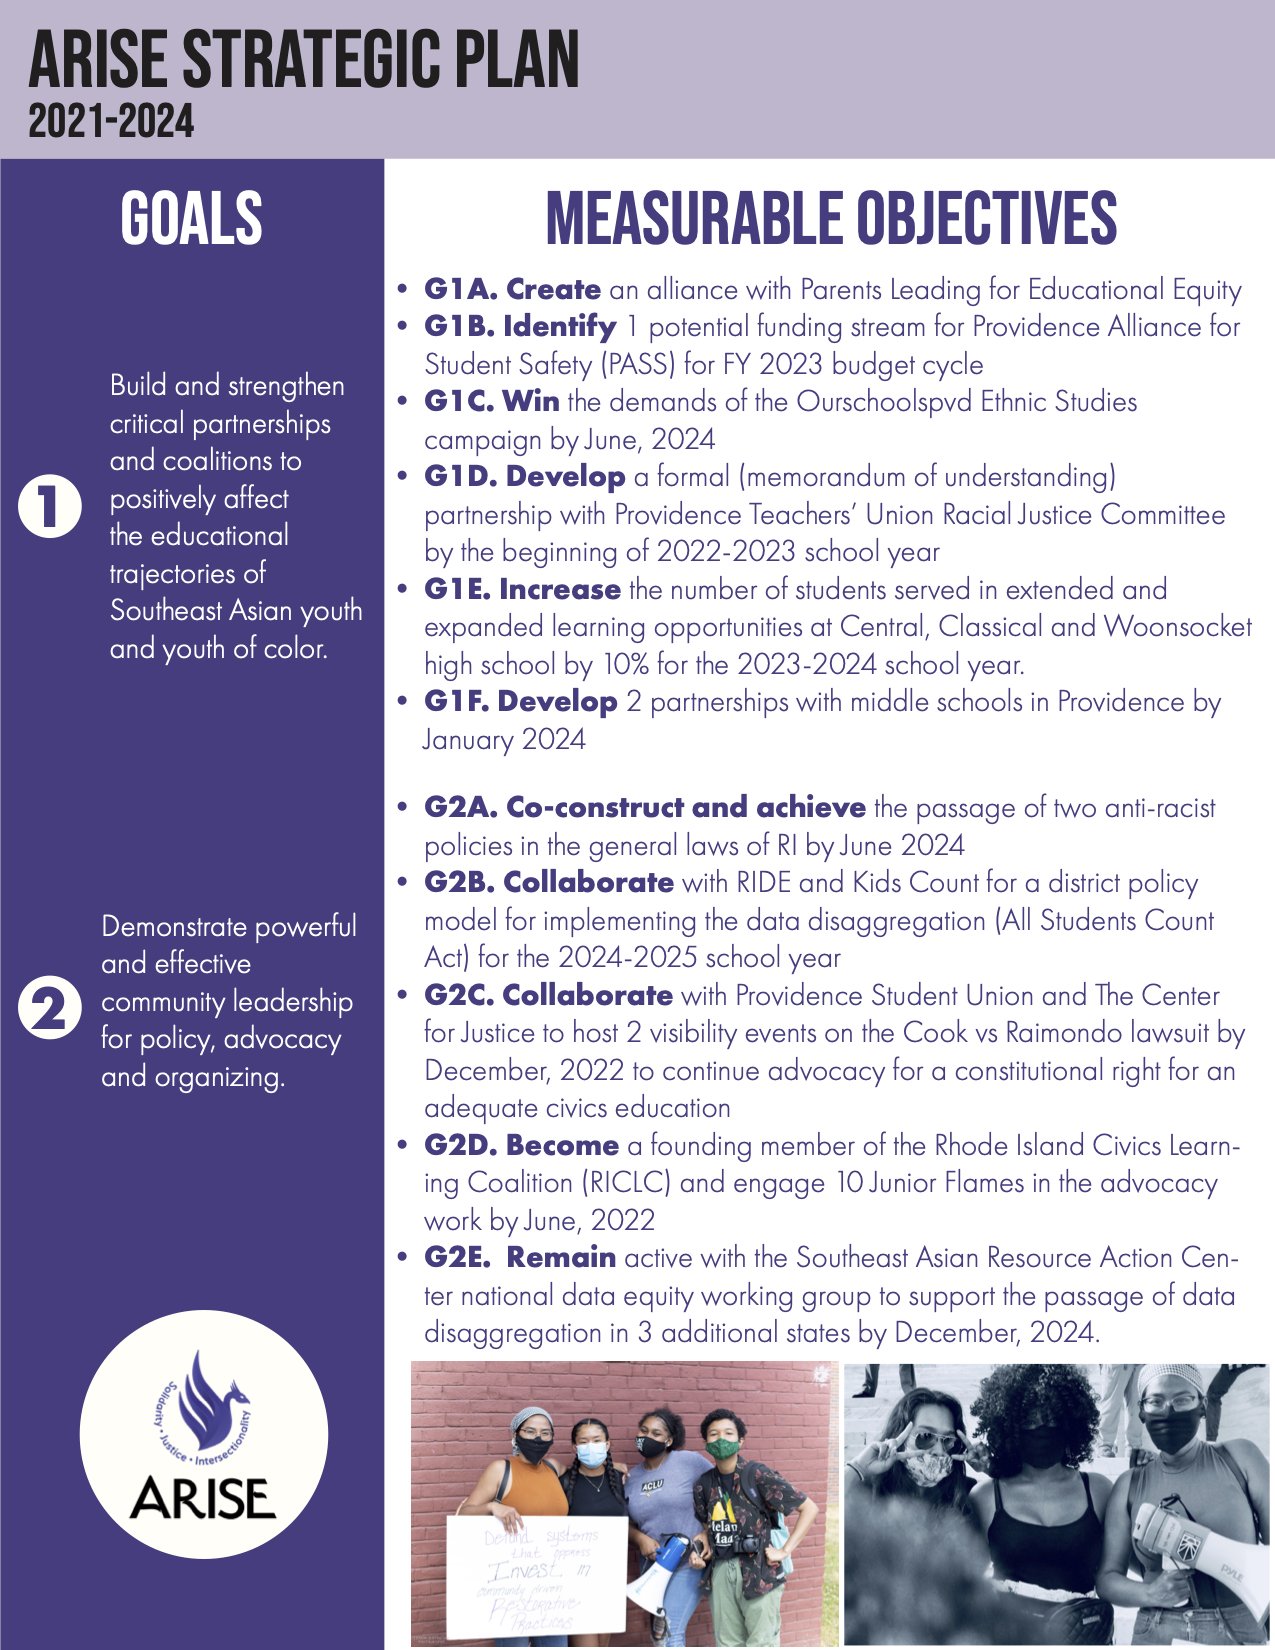 ARISE Goals + Measurable Objectives (1)-1 (dragged).jpg